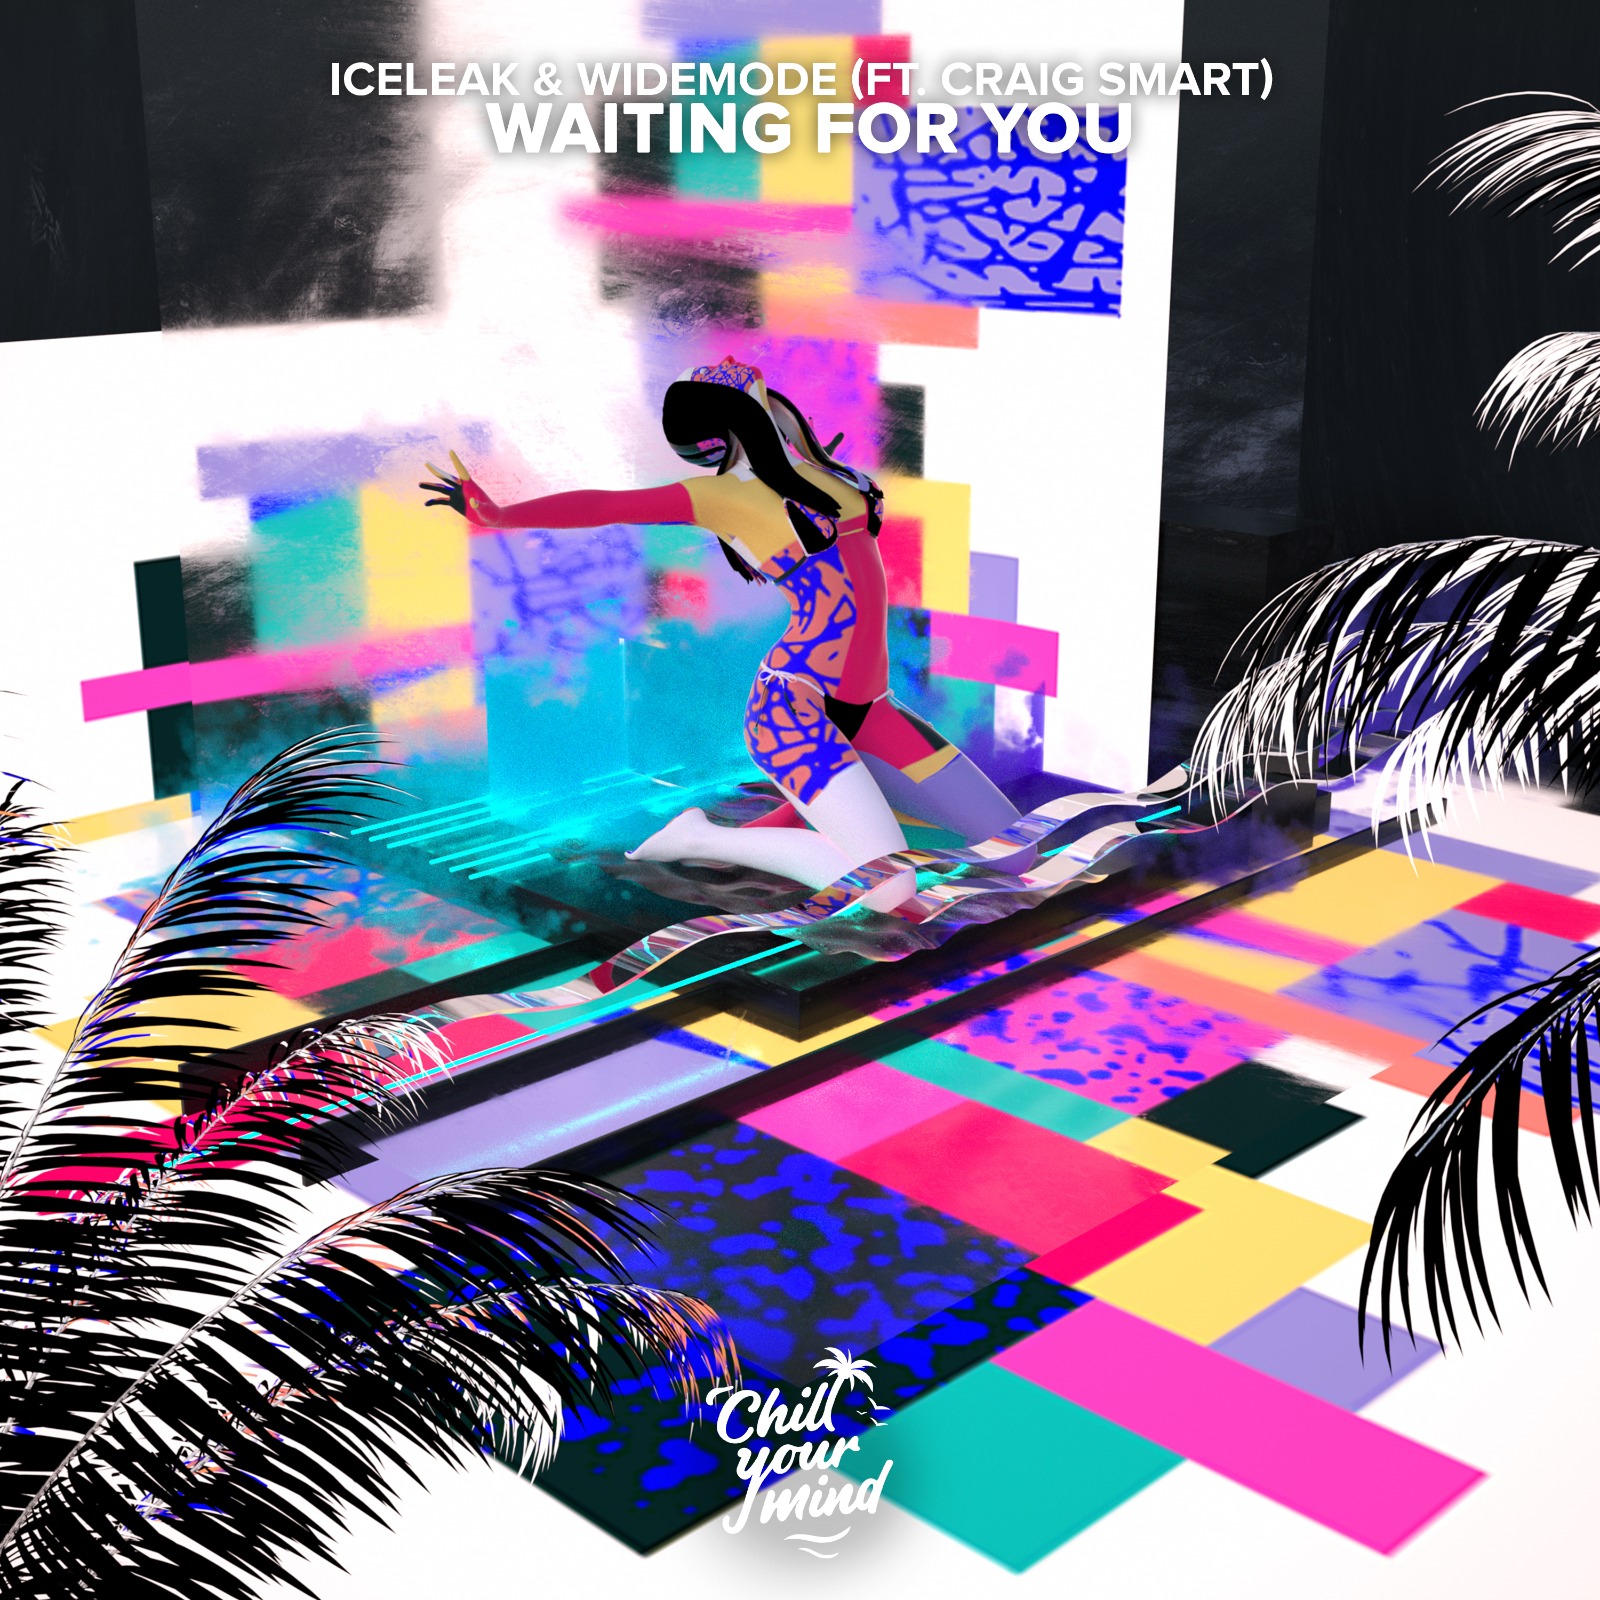 Iceleak & Widemode Team Up For ‘Waiting For You’ on ChillYourMind